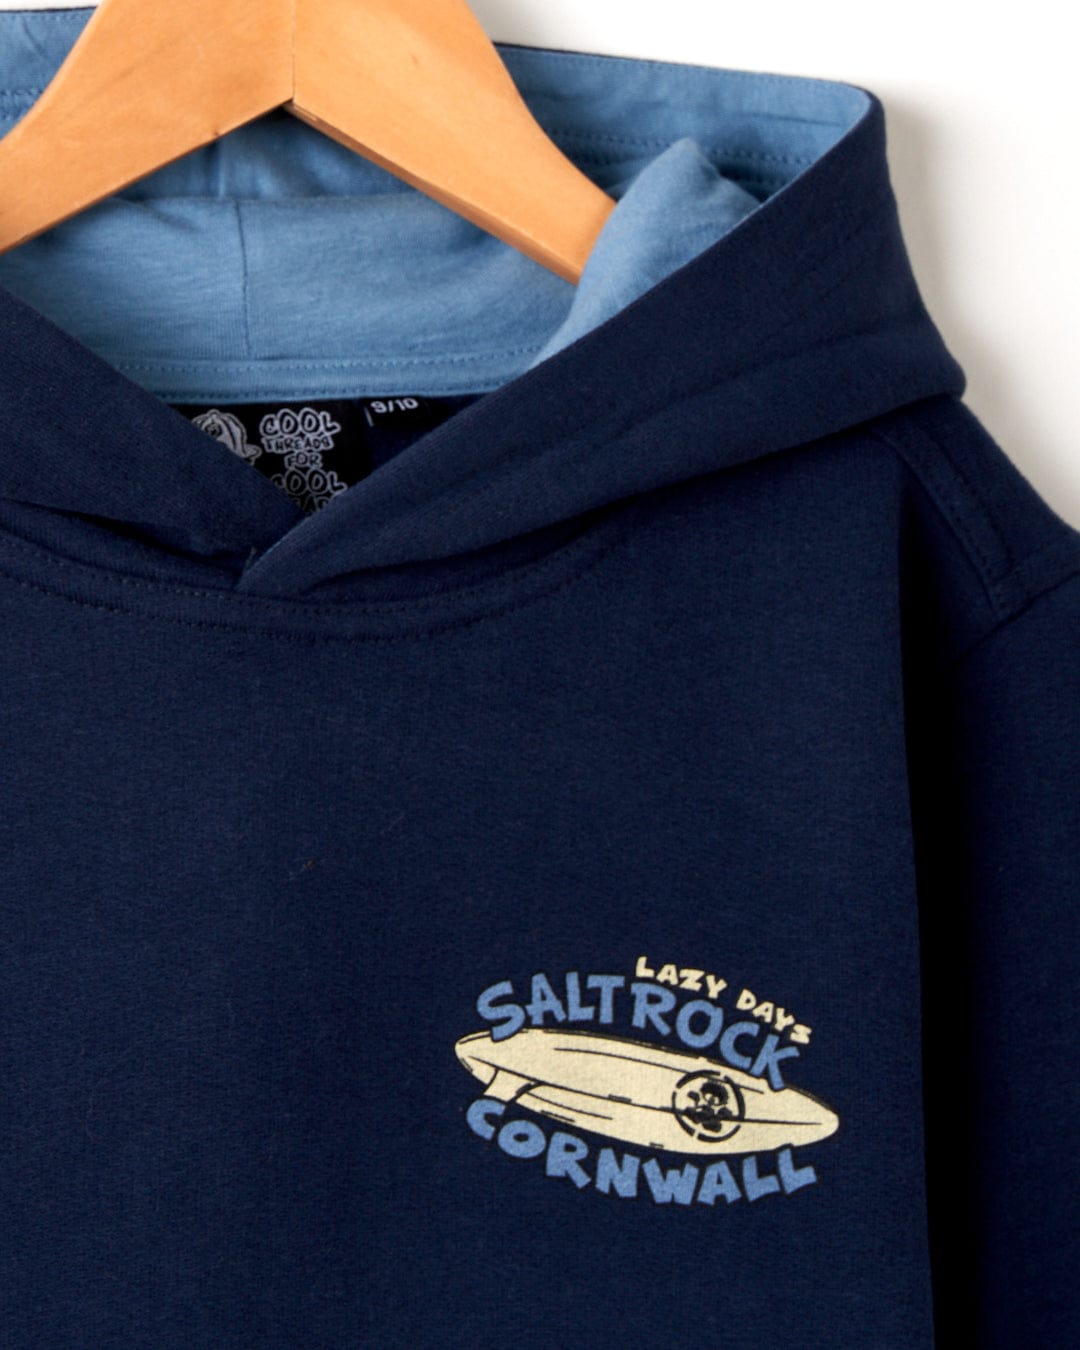 Close-up of a Lazy Location Cornwall - Recycled Kids Hoodie - Blue with the Saltrock logo, overlaid on an orange hanger against a white background.